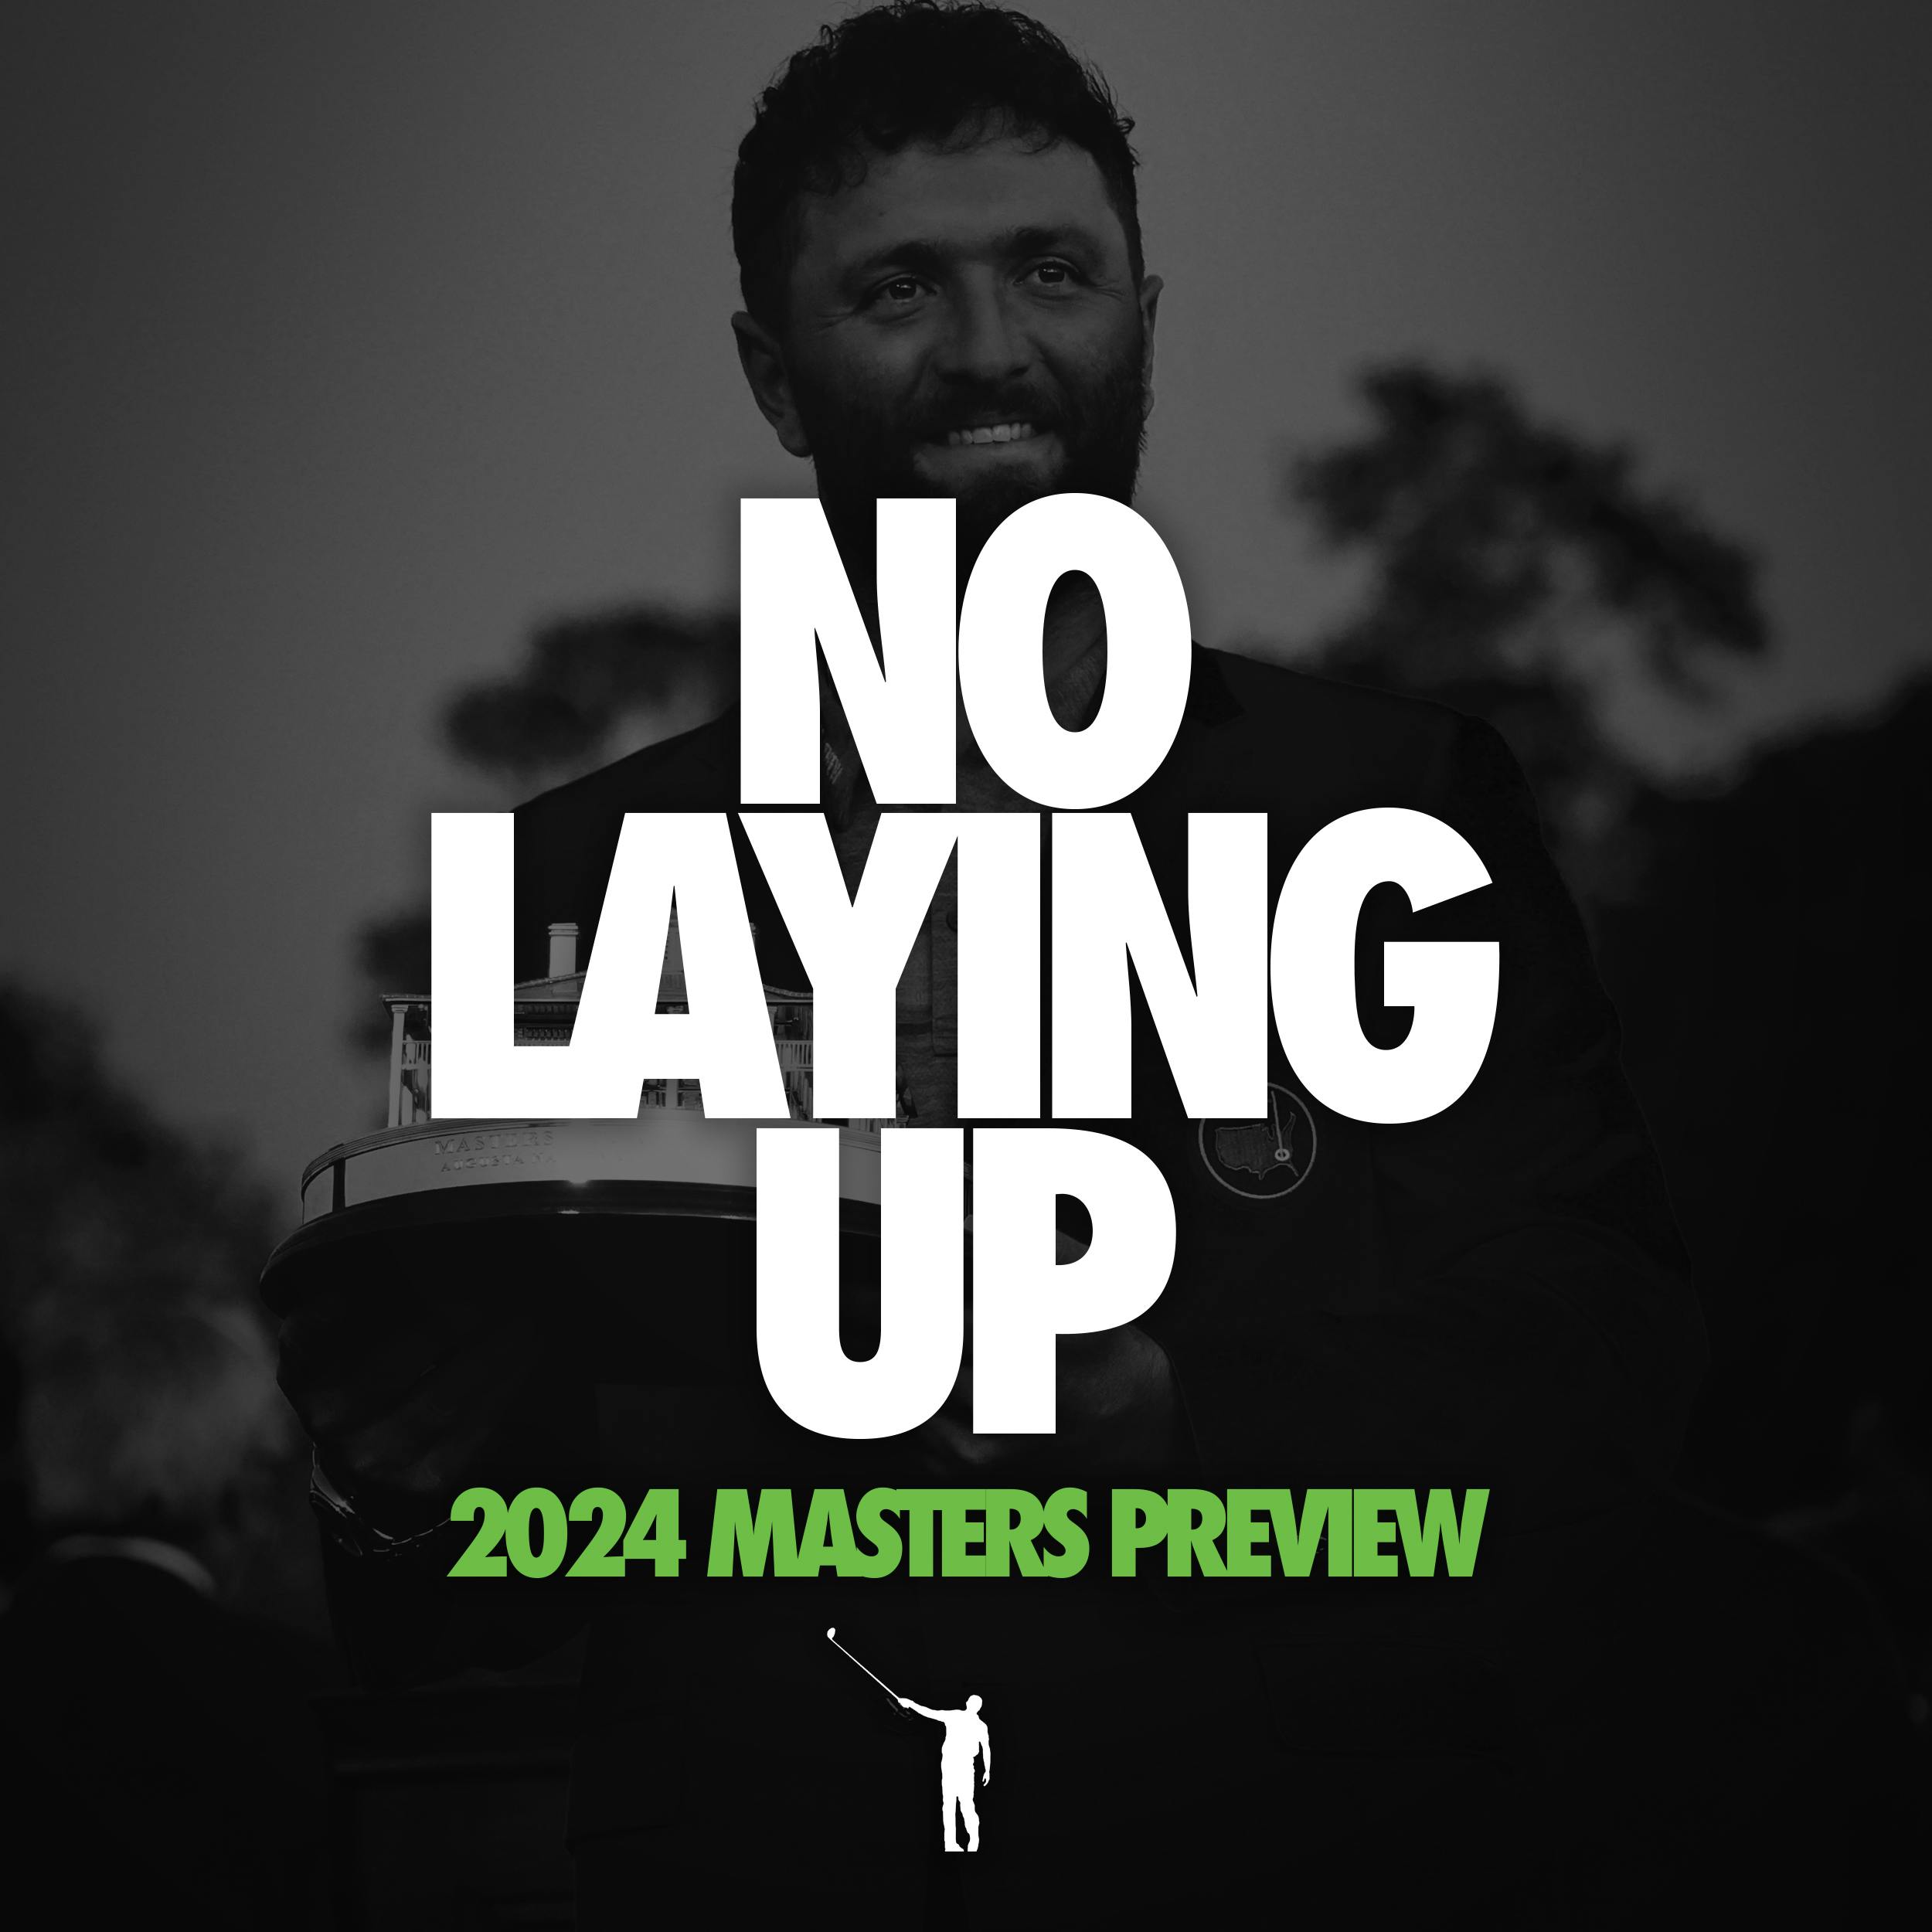 NLU Podcast, Episode 816: Masters Preview